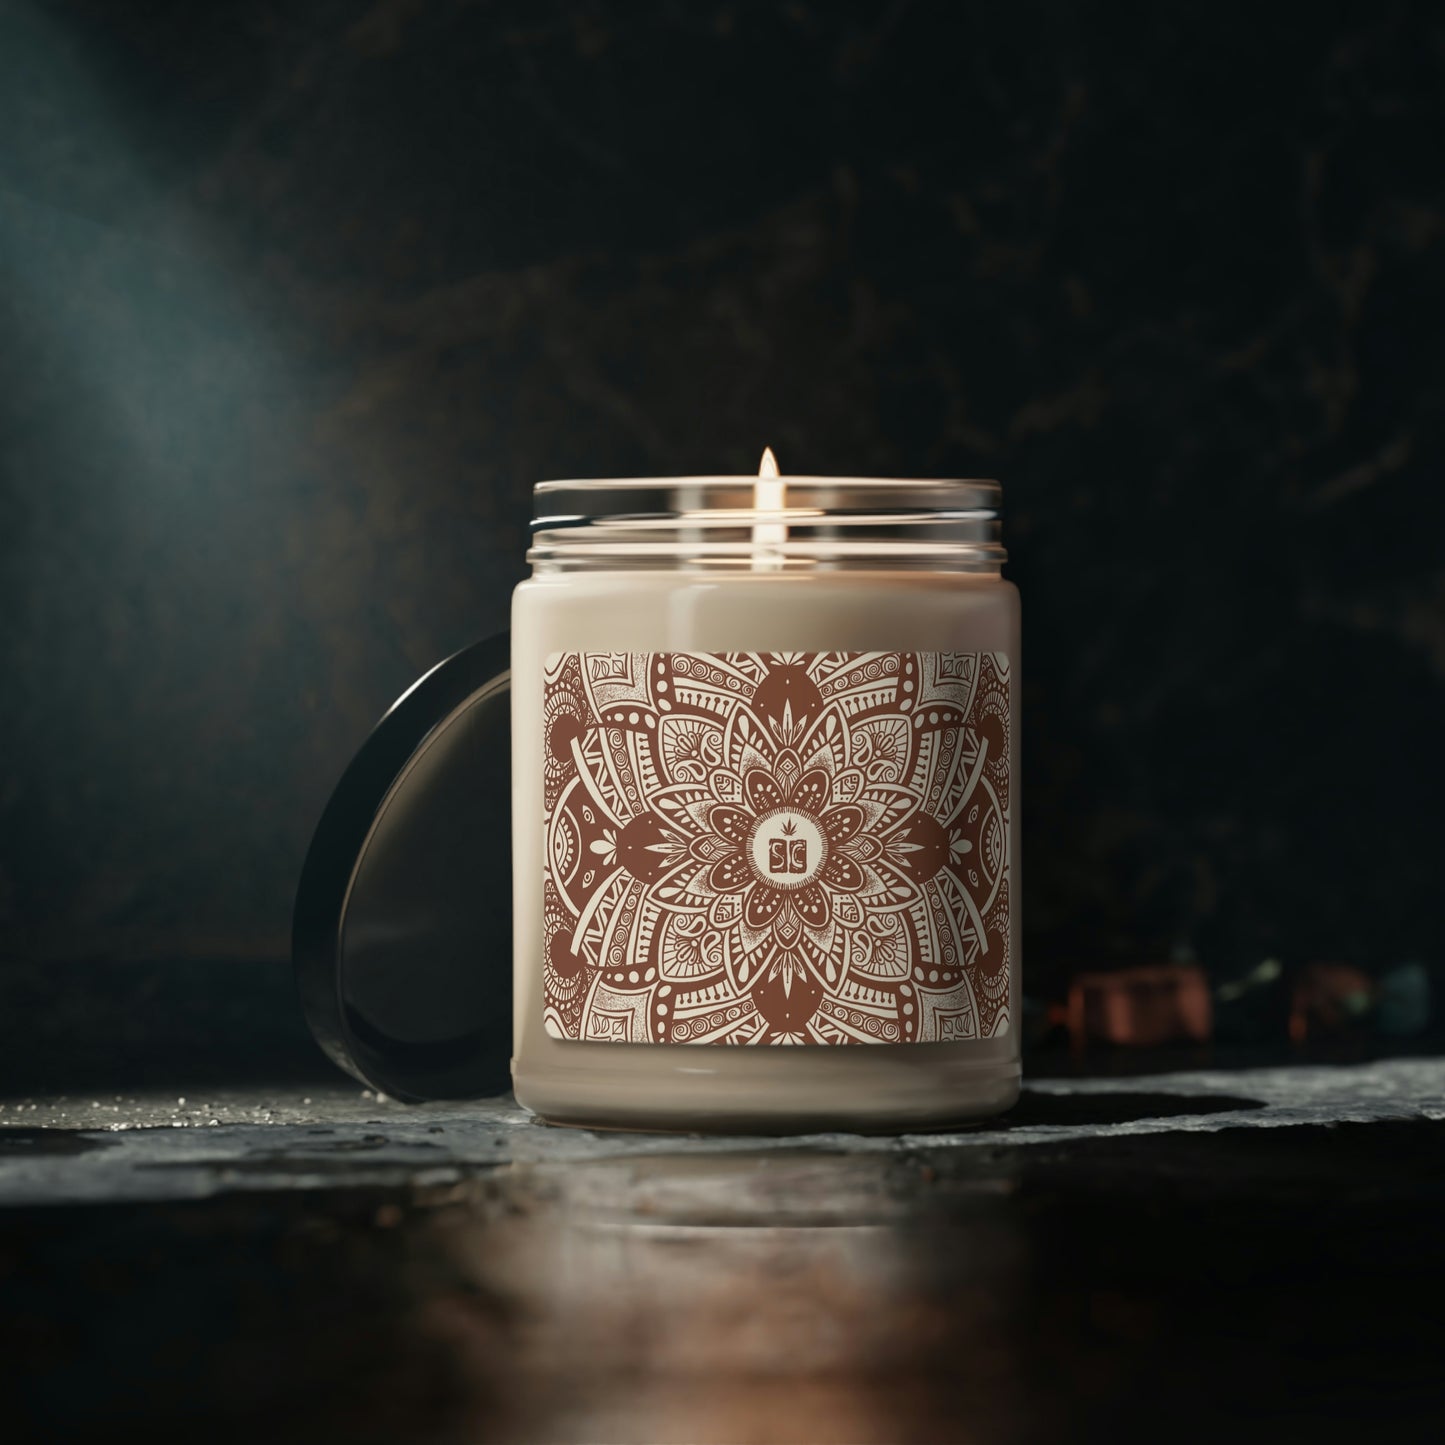 Shmacked Scented Candles - 5 Different Scents